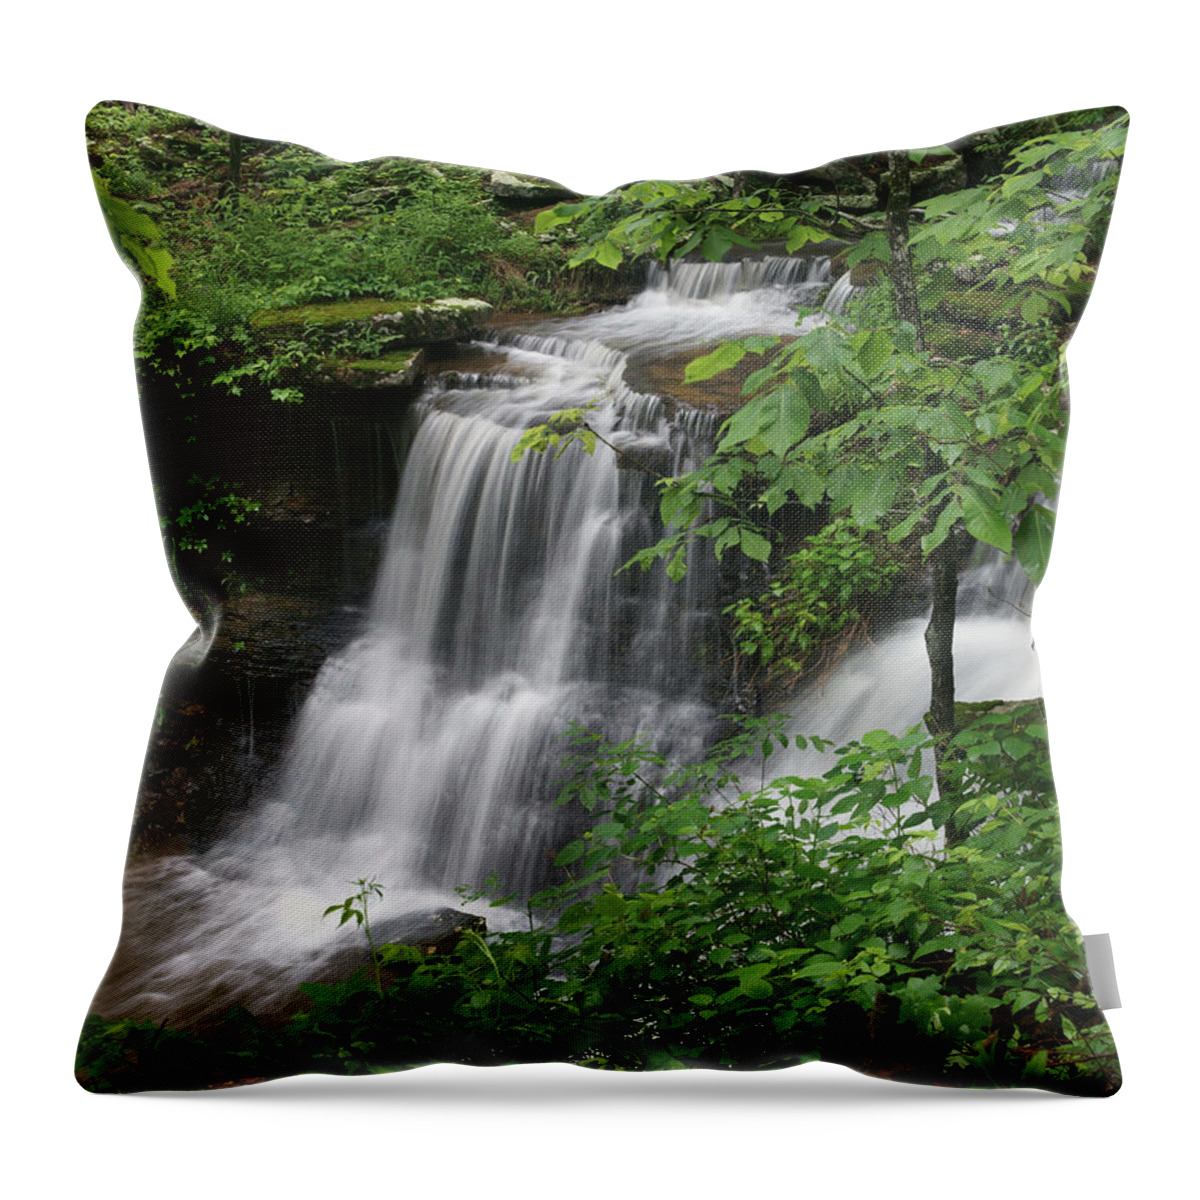 Tim Fitzharris Throw Pillow featuring the photograph Lichen Falls Ozark National Forest by Tim Fitzharris